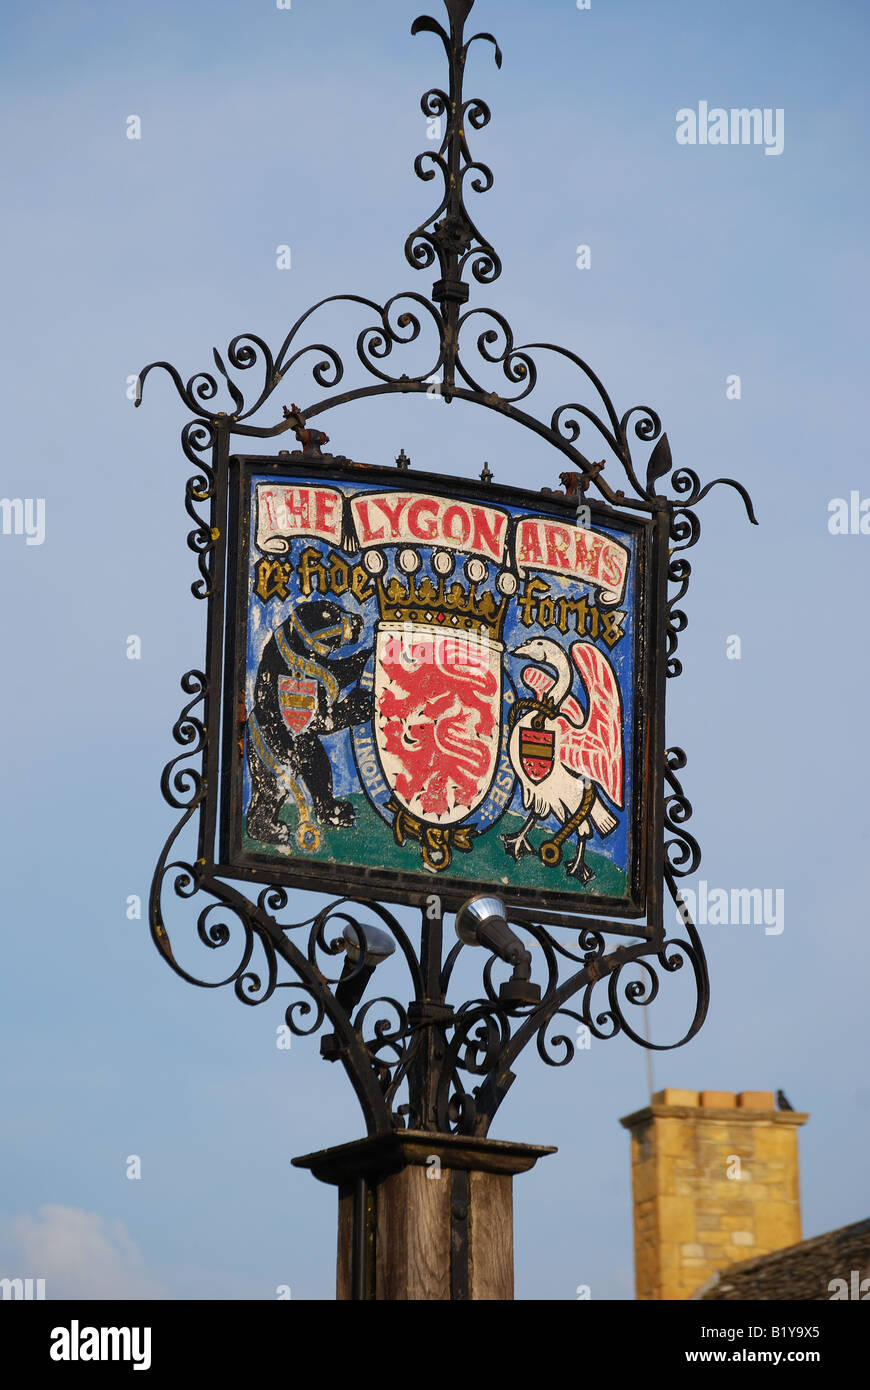 The Lygon Arms sign, High Street, Broadway, Worcestershire, England, United Kingdom Stock Photo